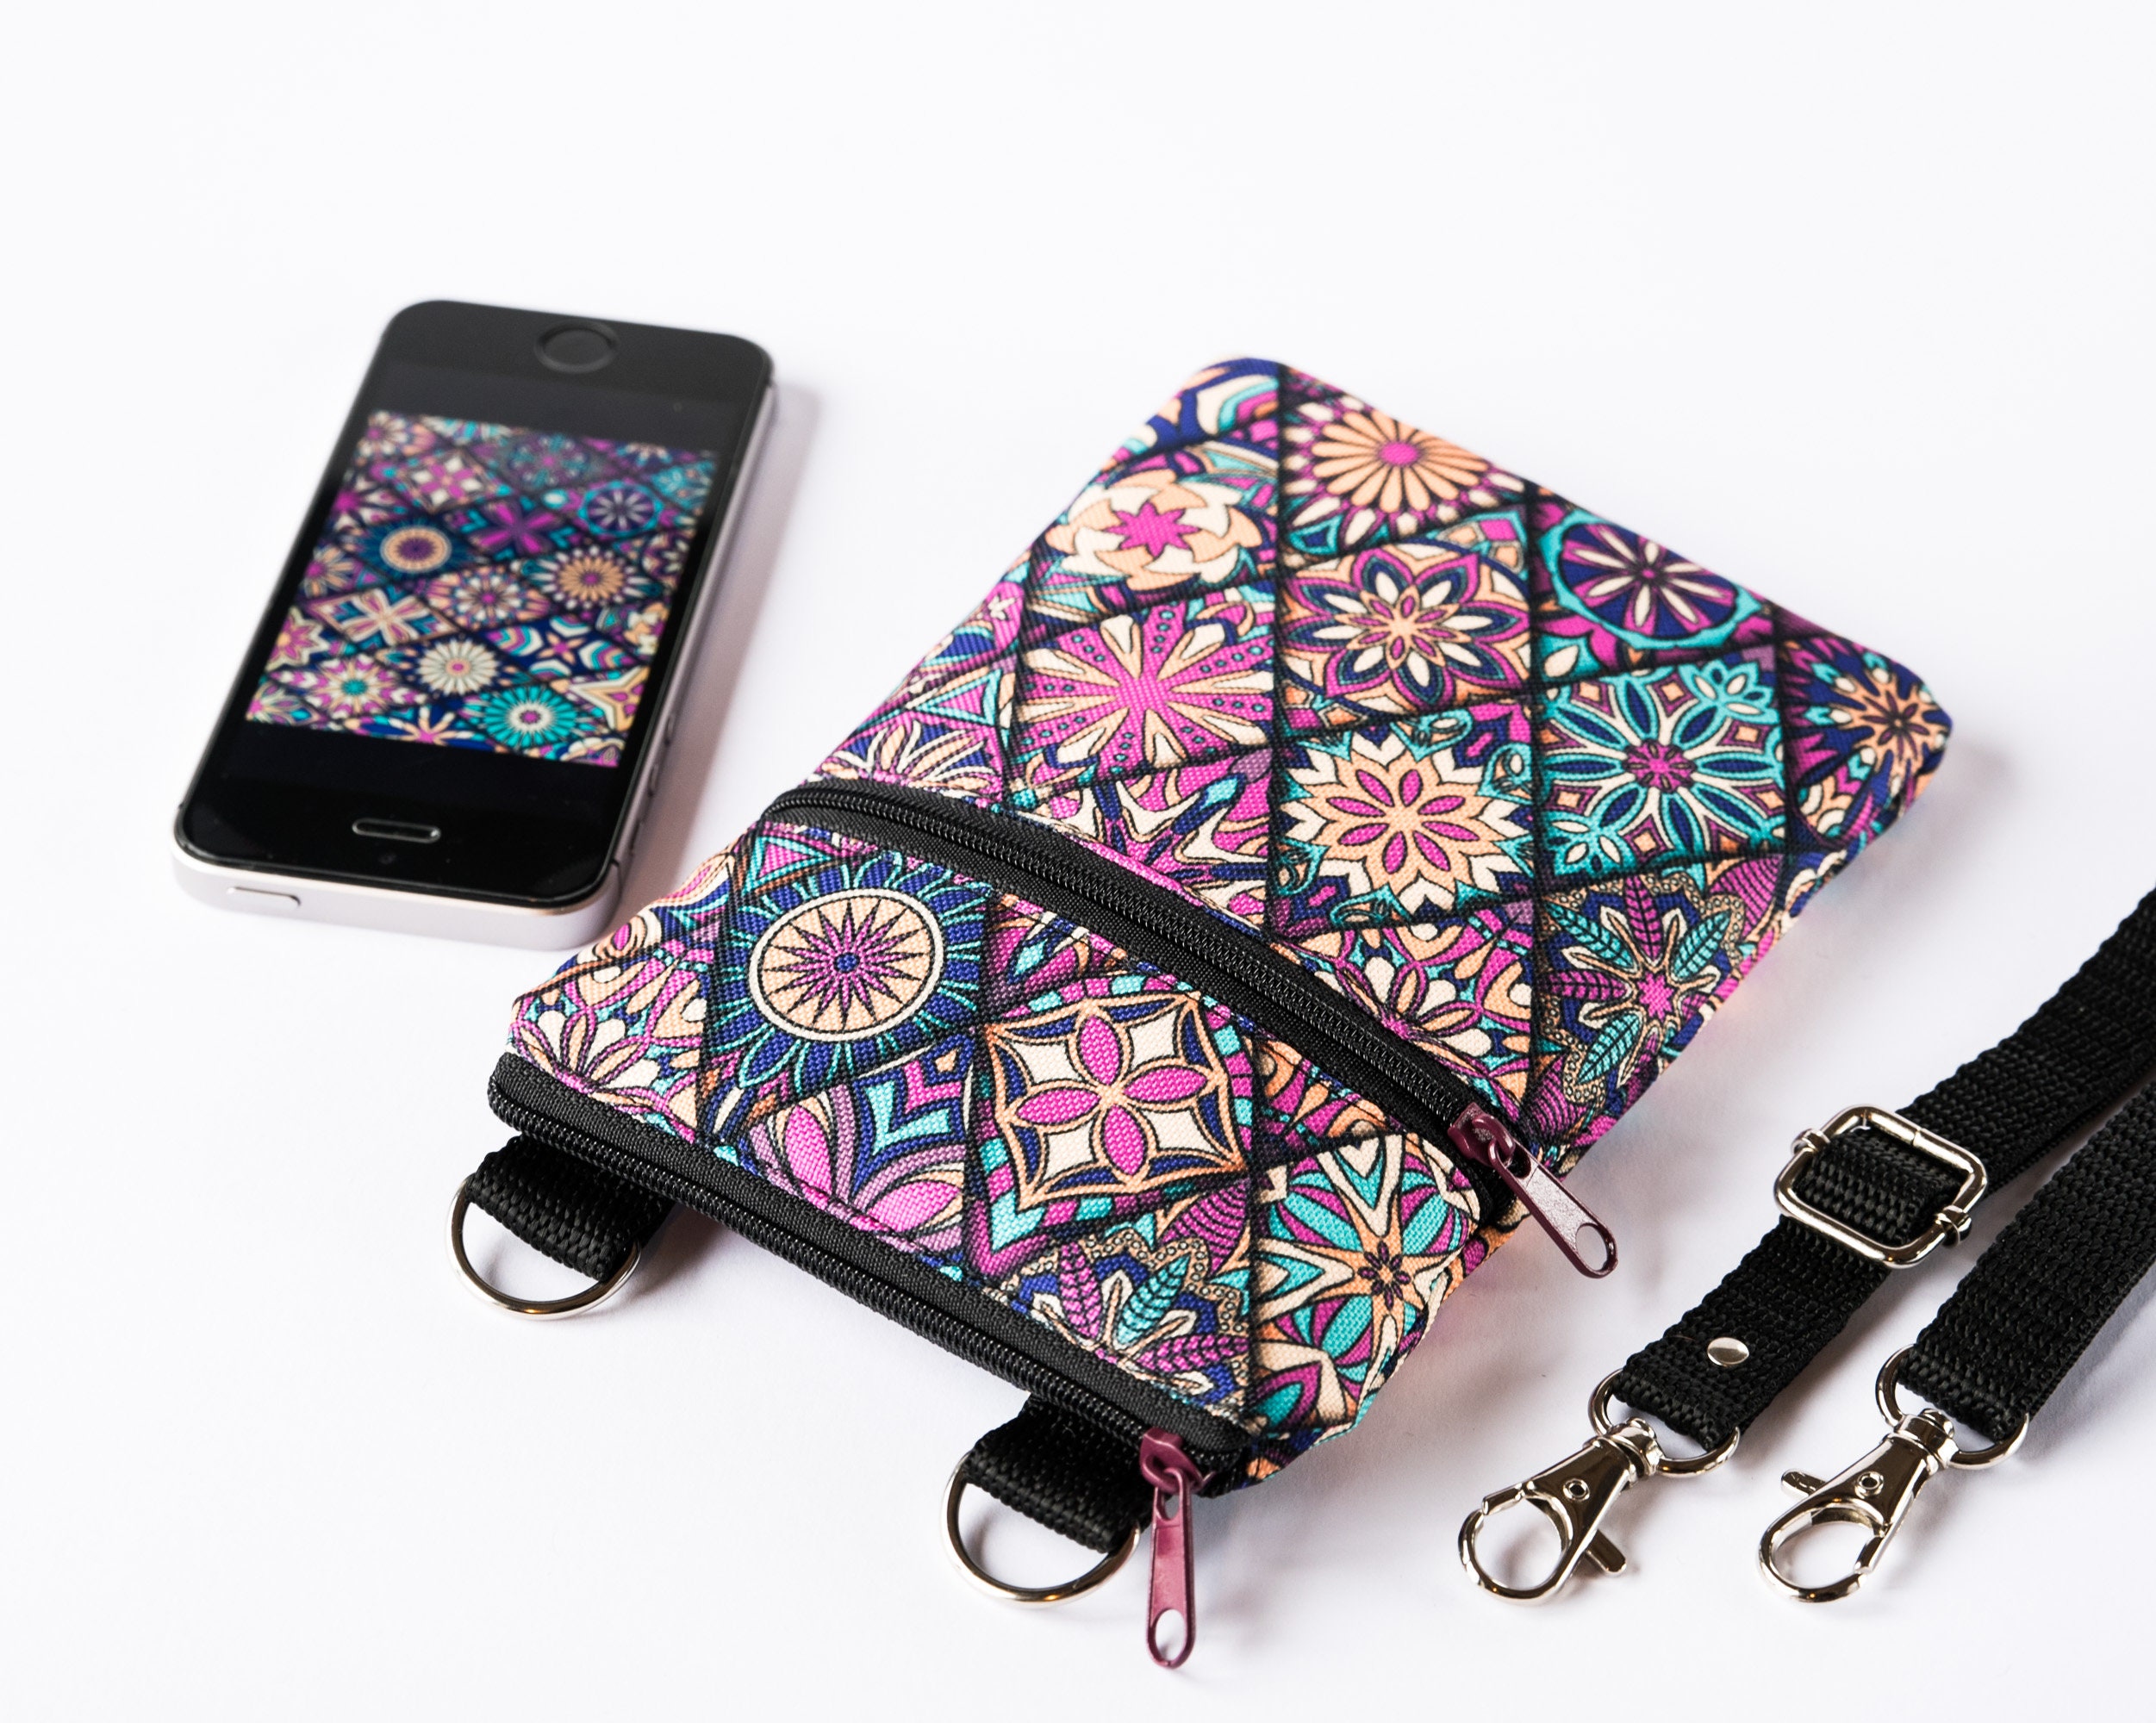 Neck Pouch Bag for Cell Phone, Travel Neck Purse for Mobile Phone